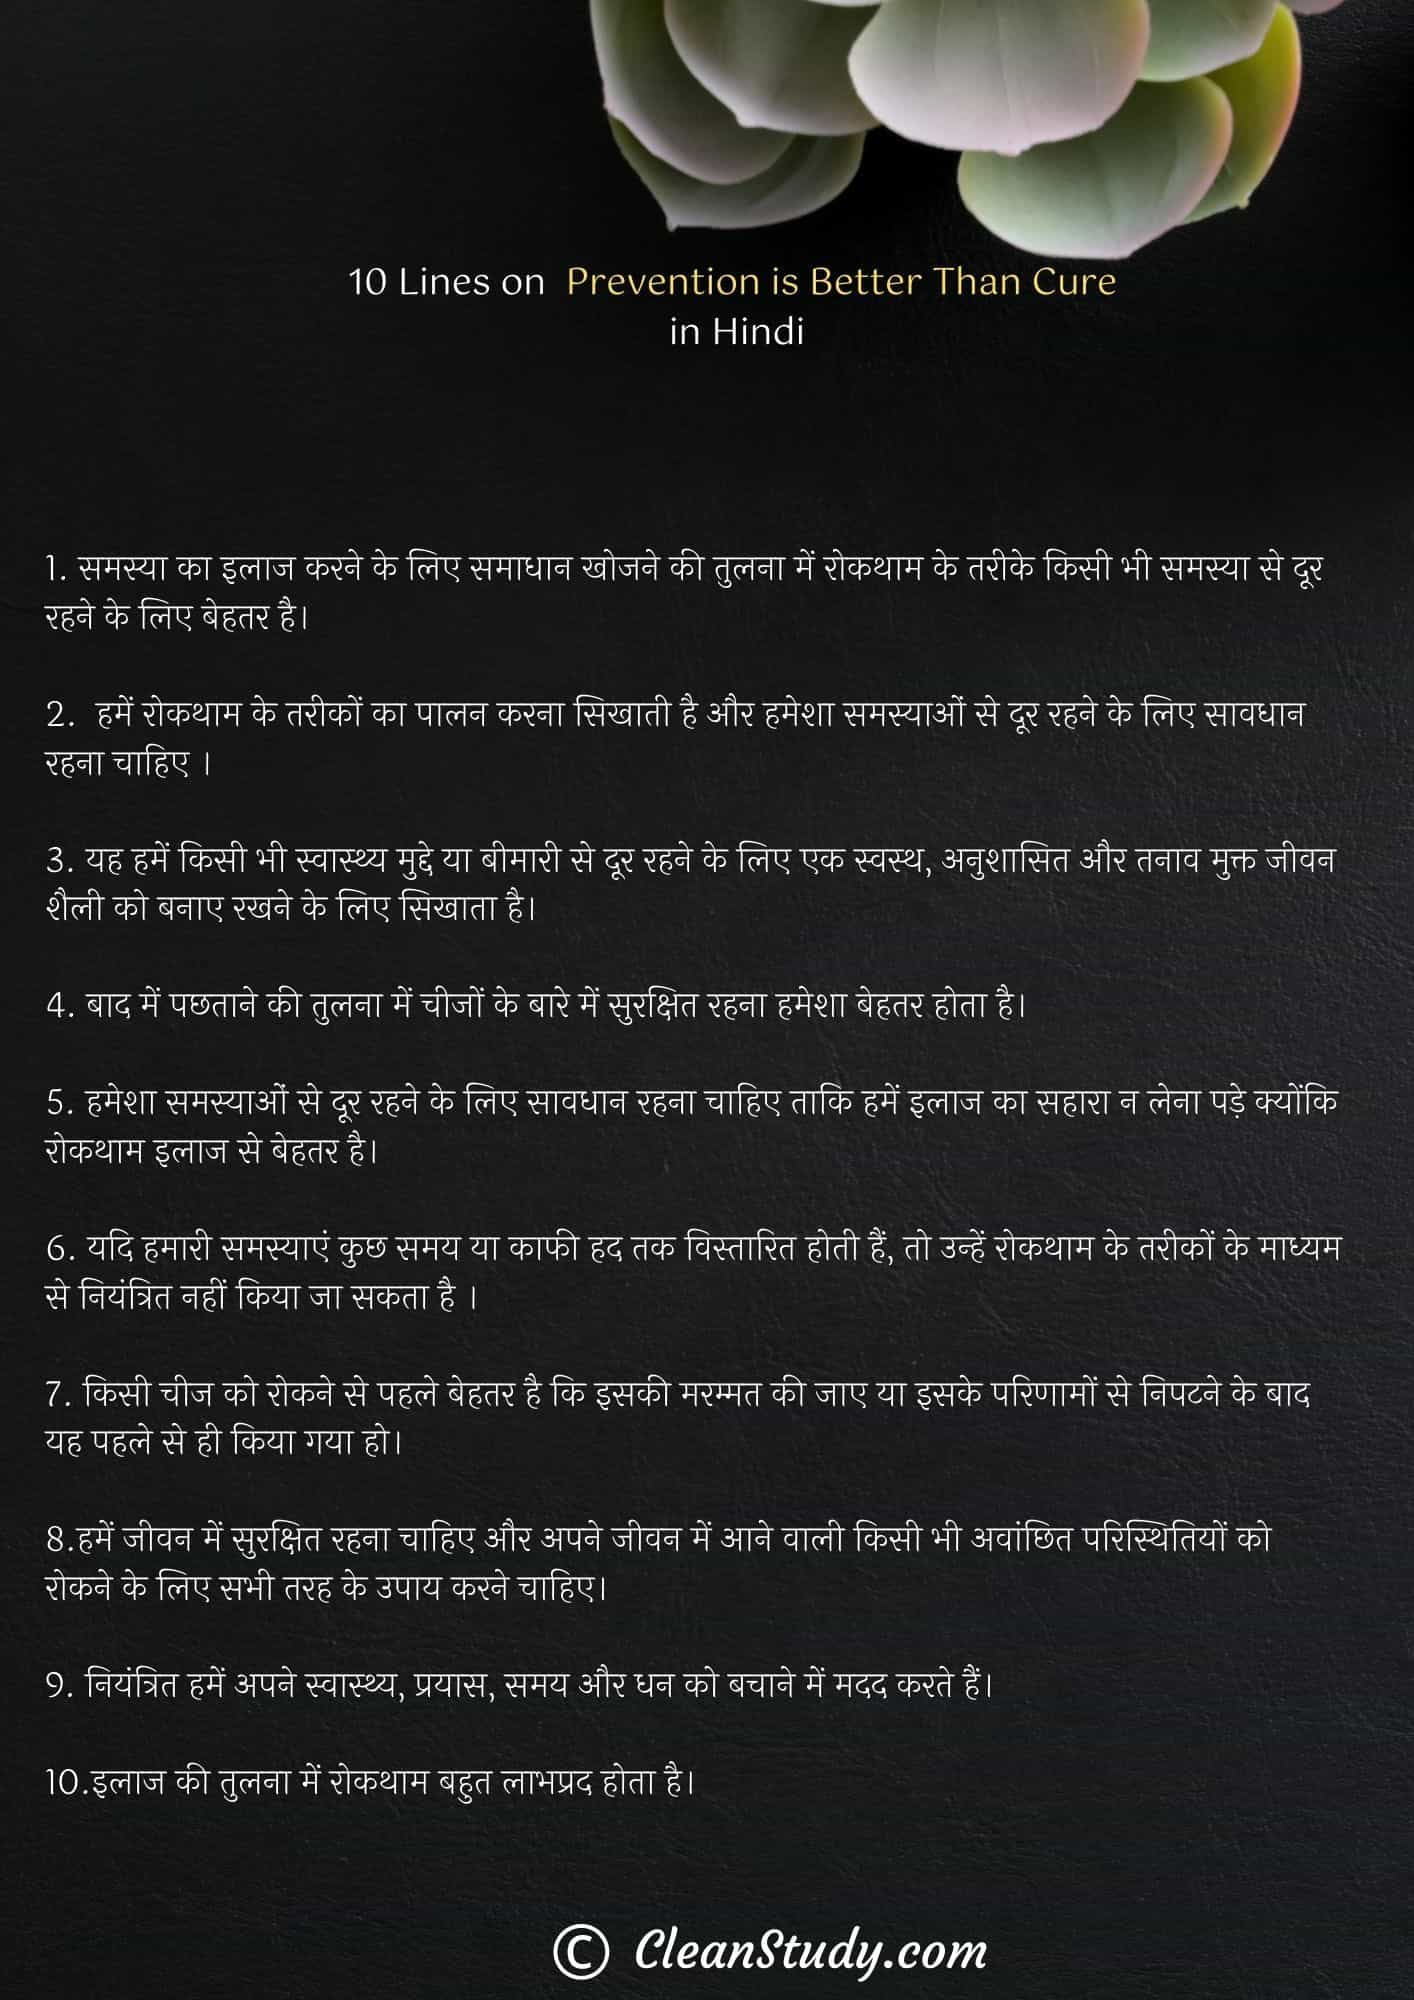 10 Lines on Prevention is Better Than Cure in Hindi